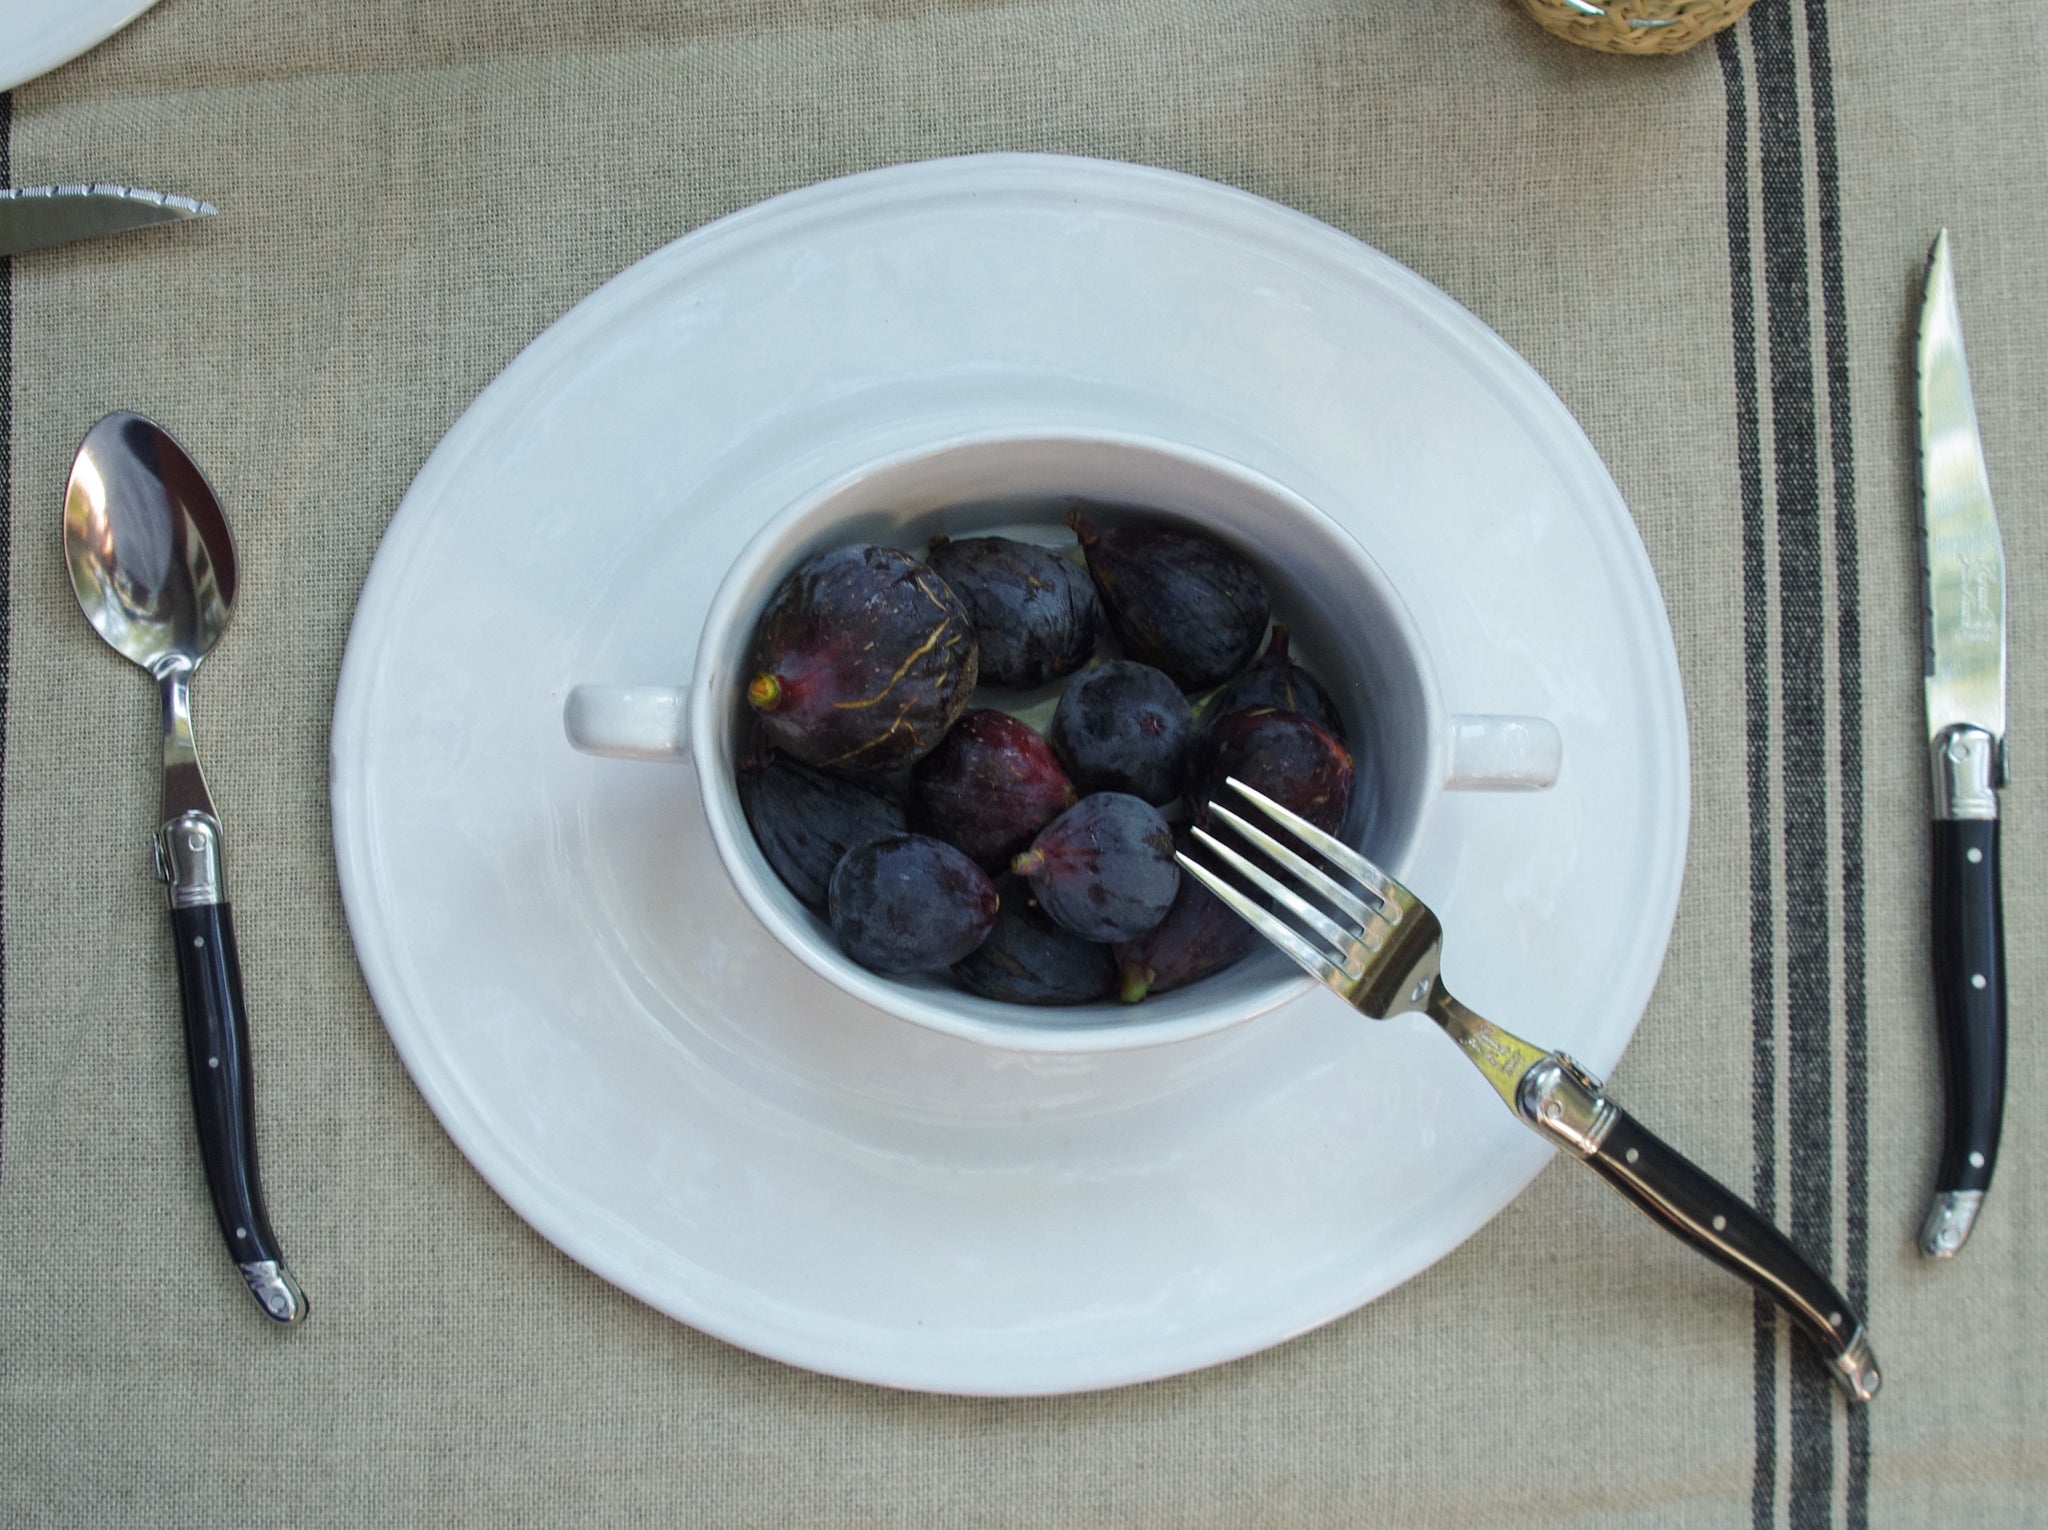 Bowl with two handles holding figs next to cutlery with black handles and large white dinner plate.